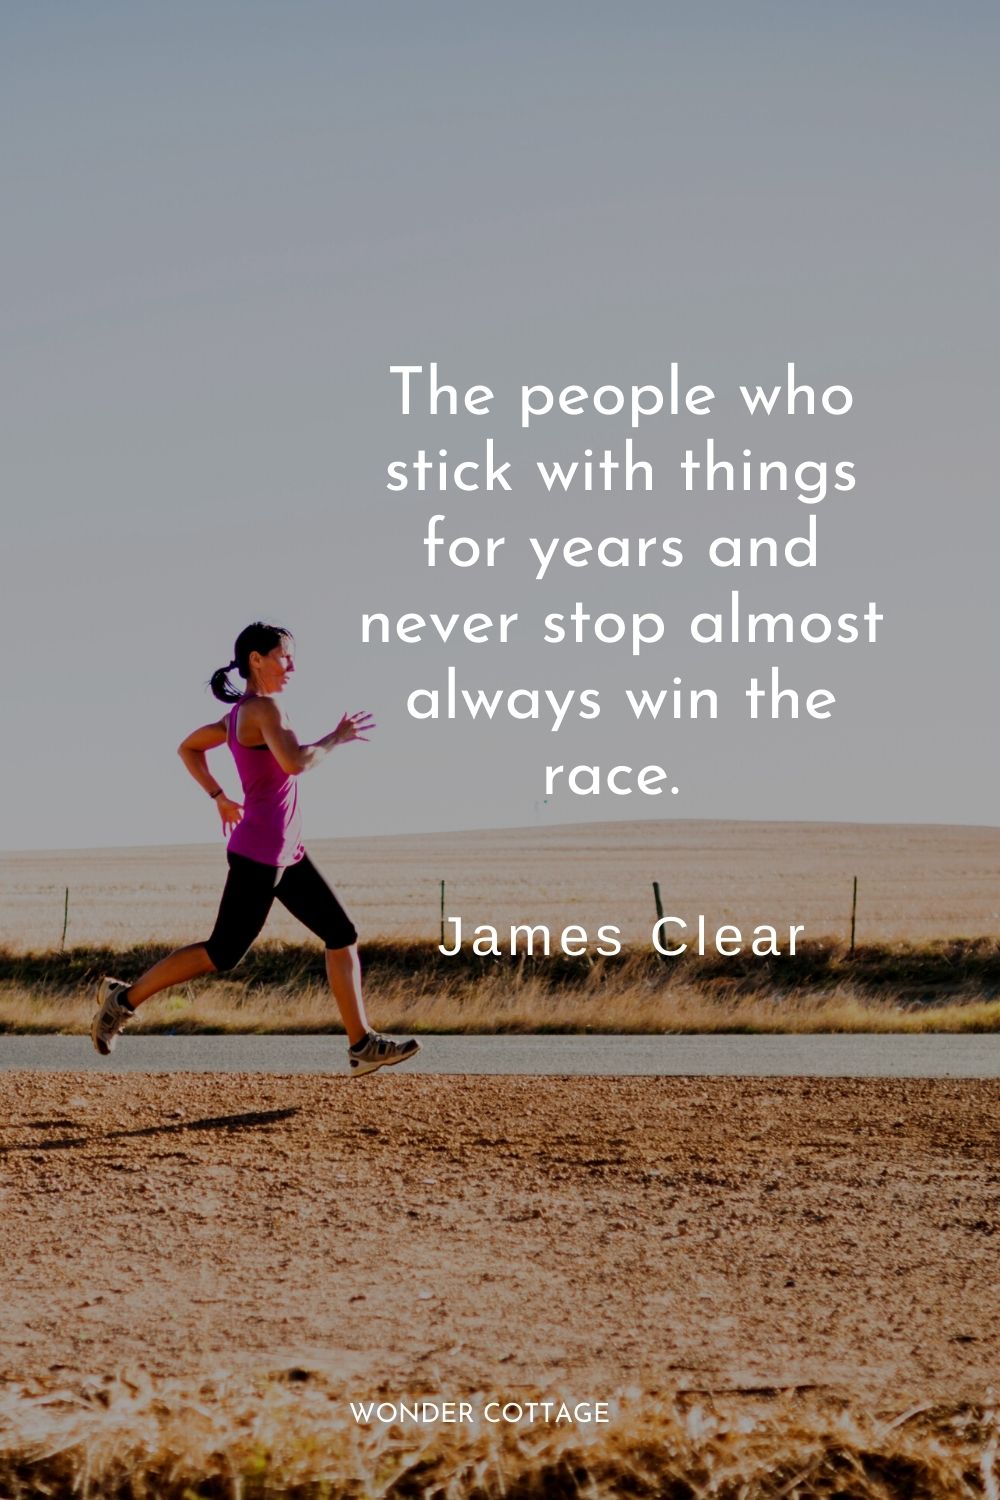 The people who stick with things for years and never stop almost always win the race.  James Clear